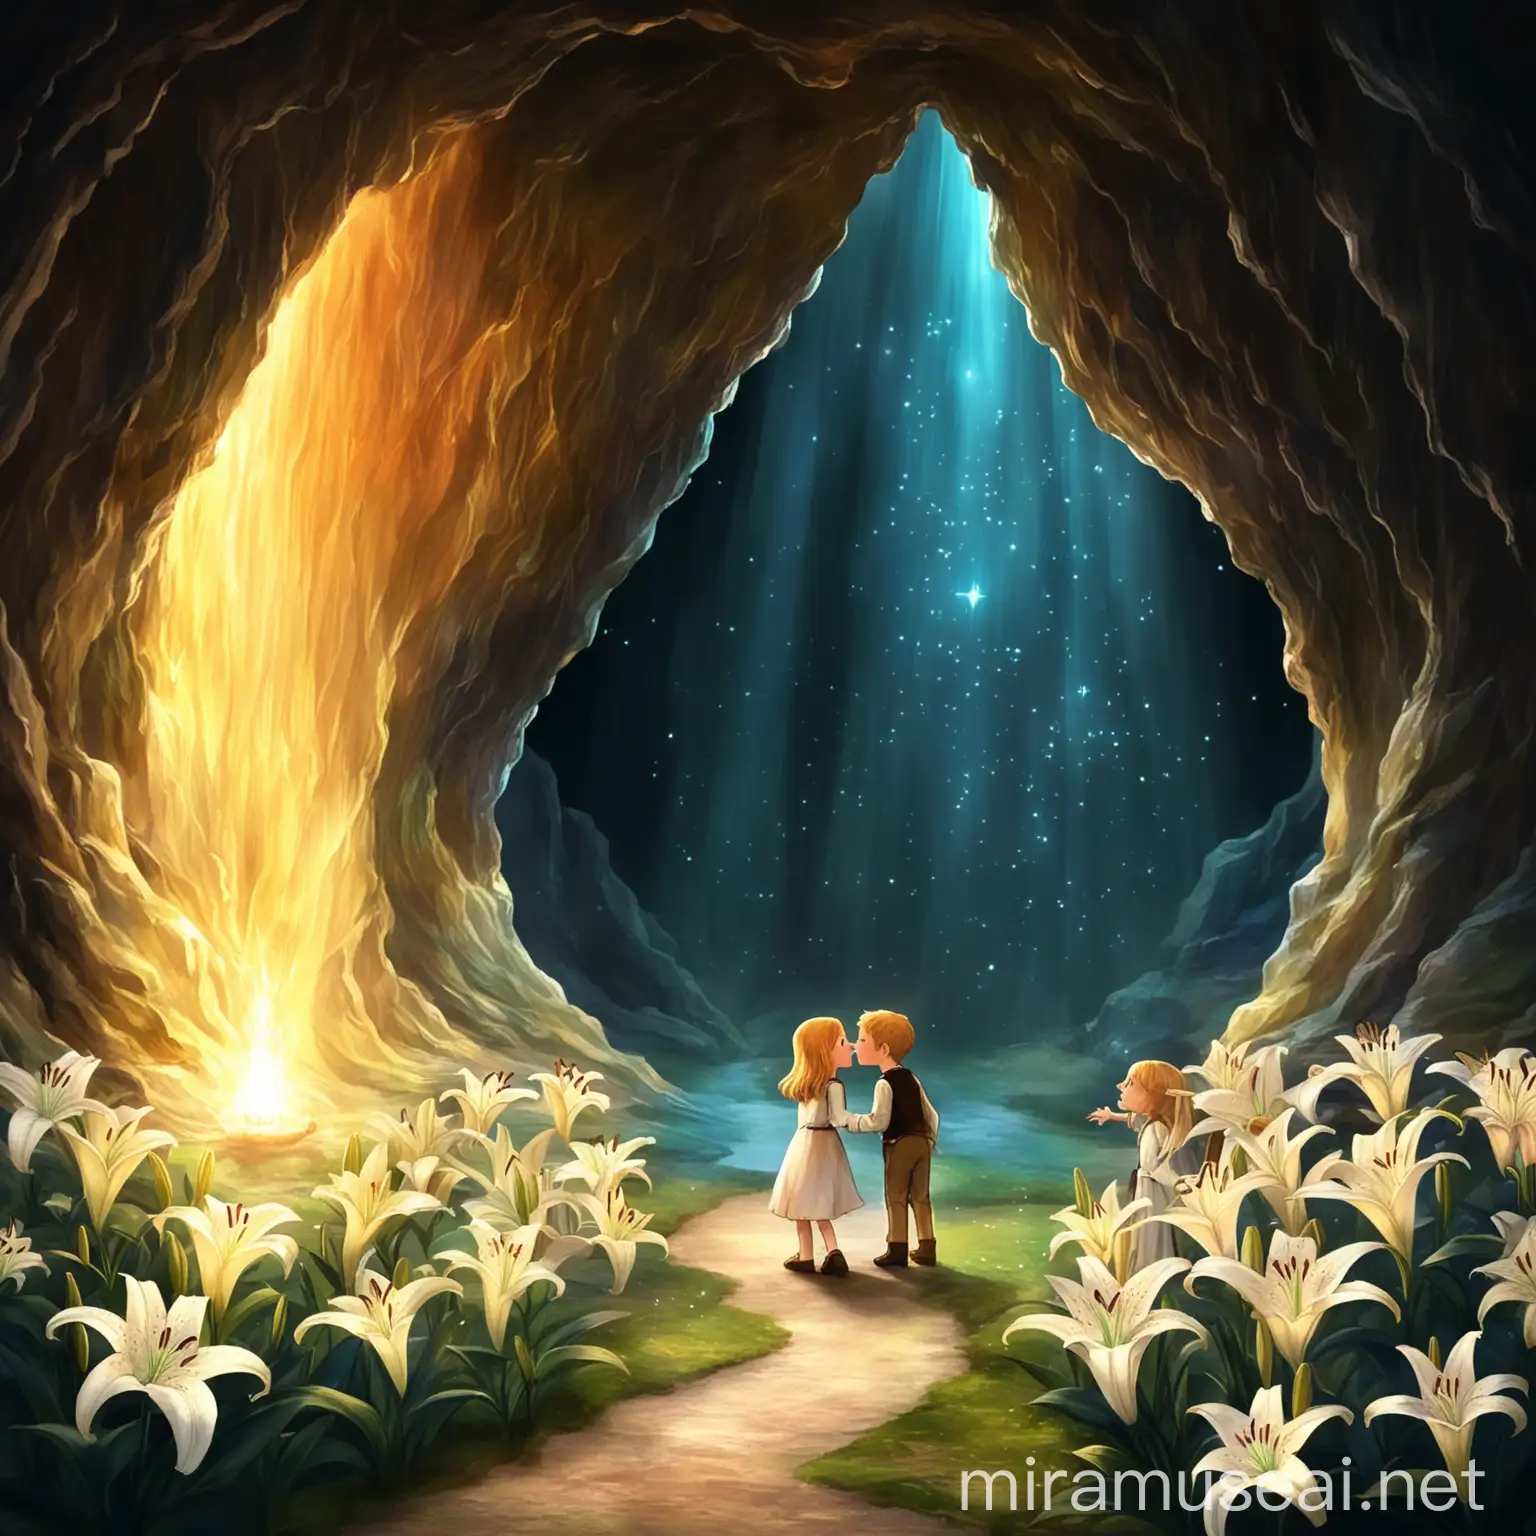 
Lily and Arthur gasped. A glowing cave shimmered with magic. "A wishing cave!" Arthur exclaimed.

"Wish us home?" Lily whispered. But something felt wrong. They'd learned so much on their journey.

Suddenly, a booming voice echoed, "One wish only!"
